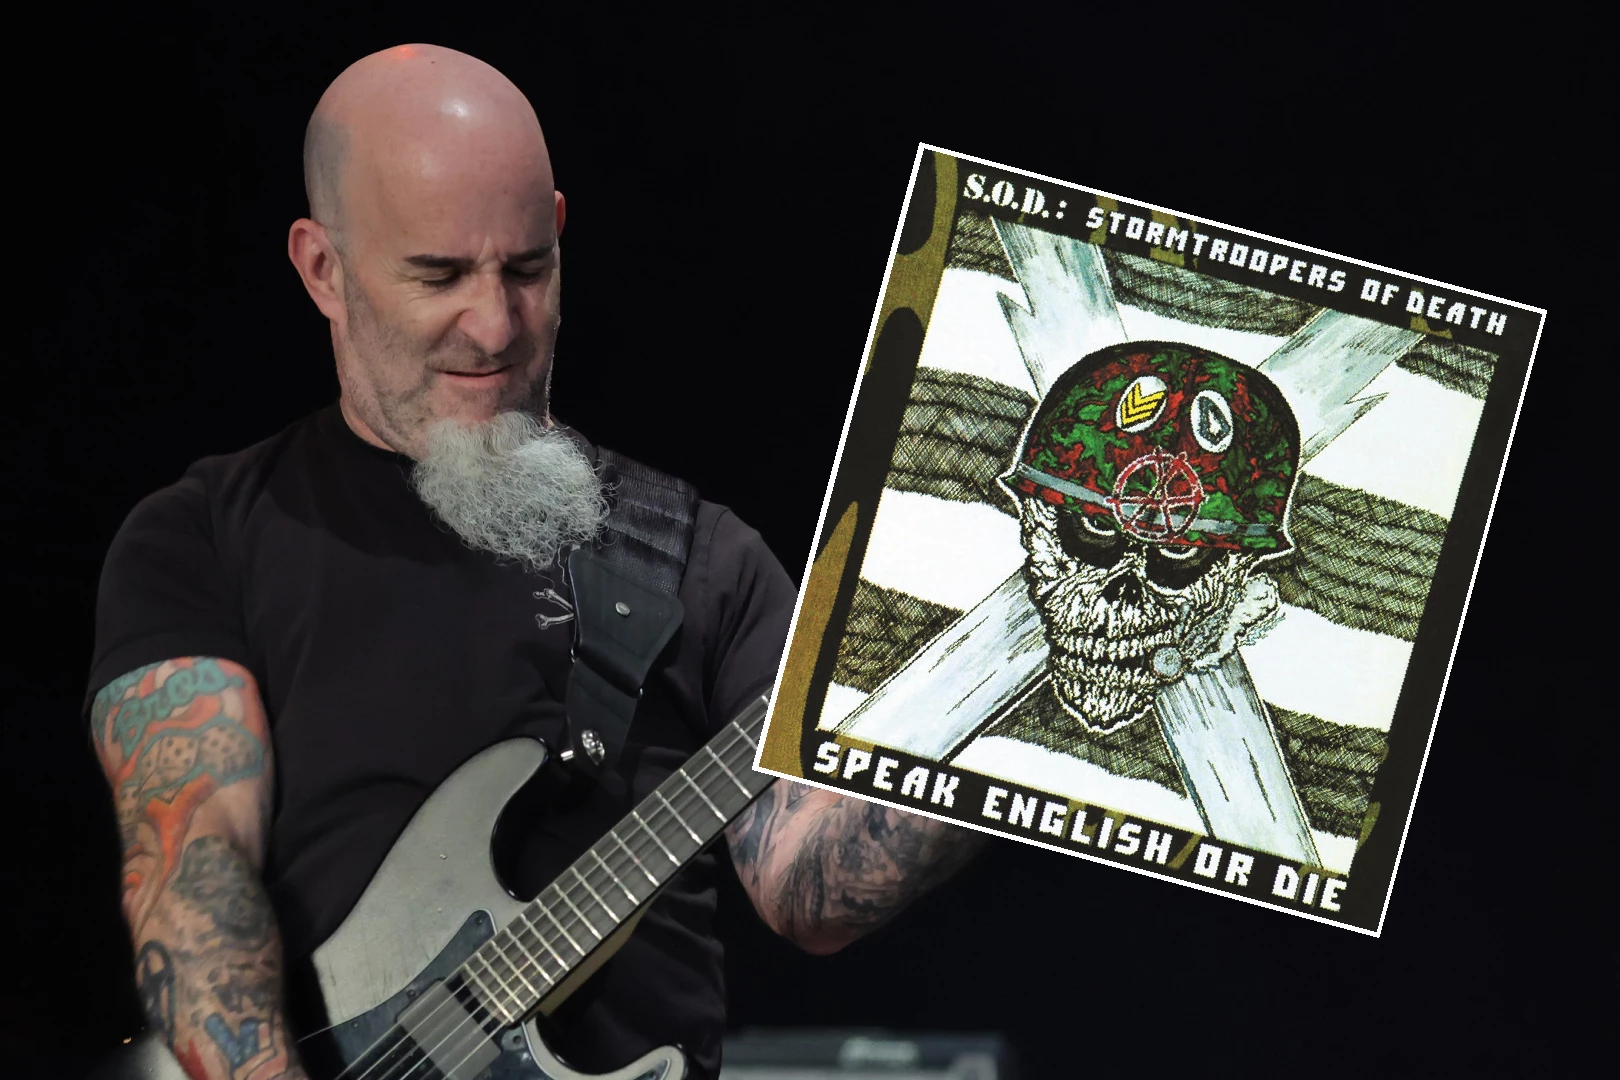 Scott Ian Thinks Stormtroopers of Death Would Be Canceled by Some